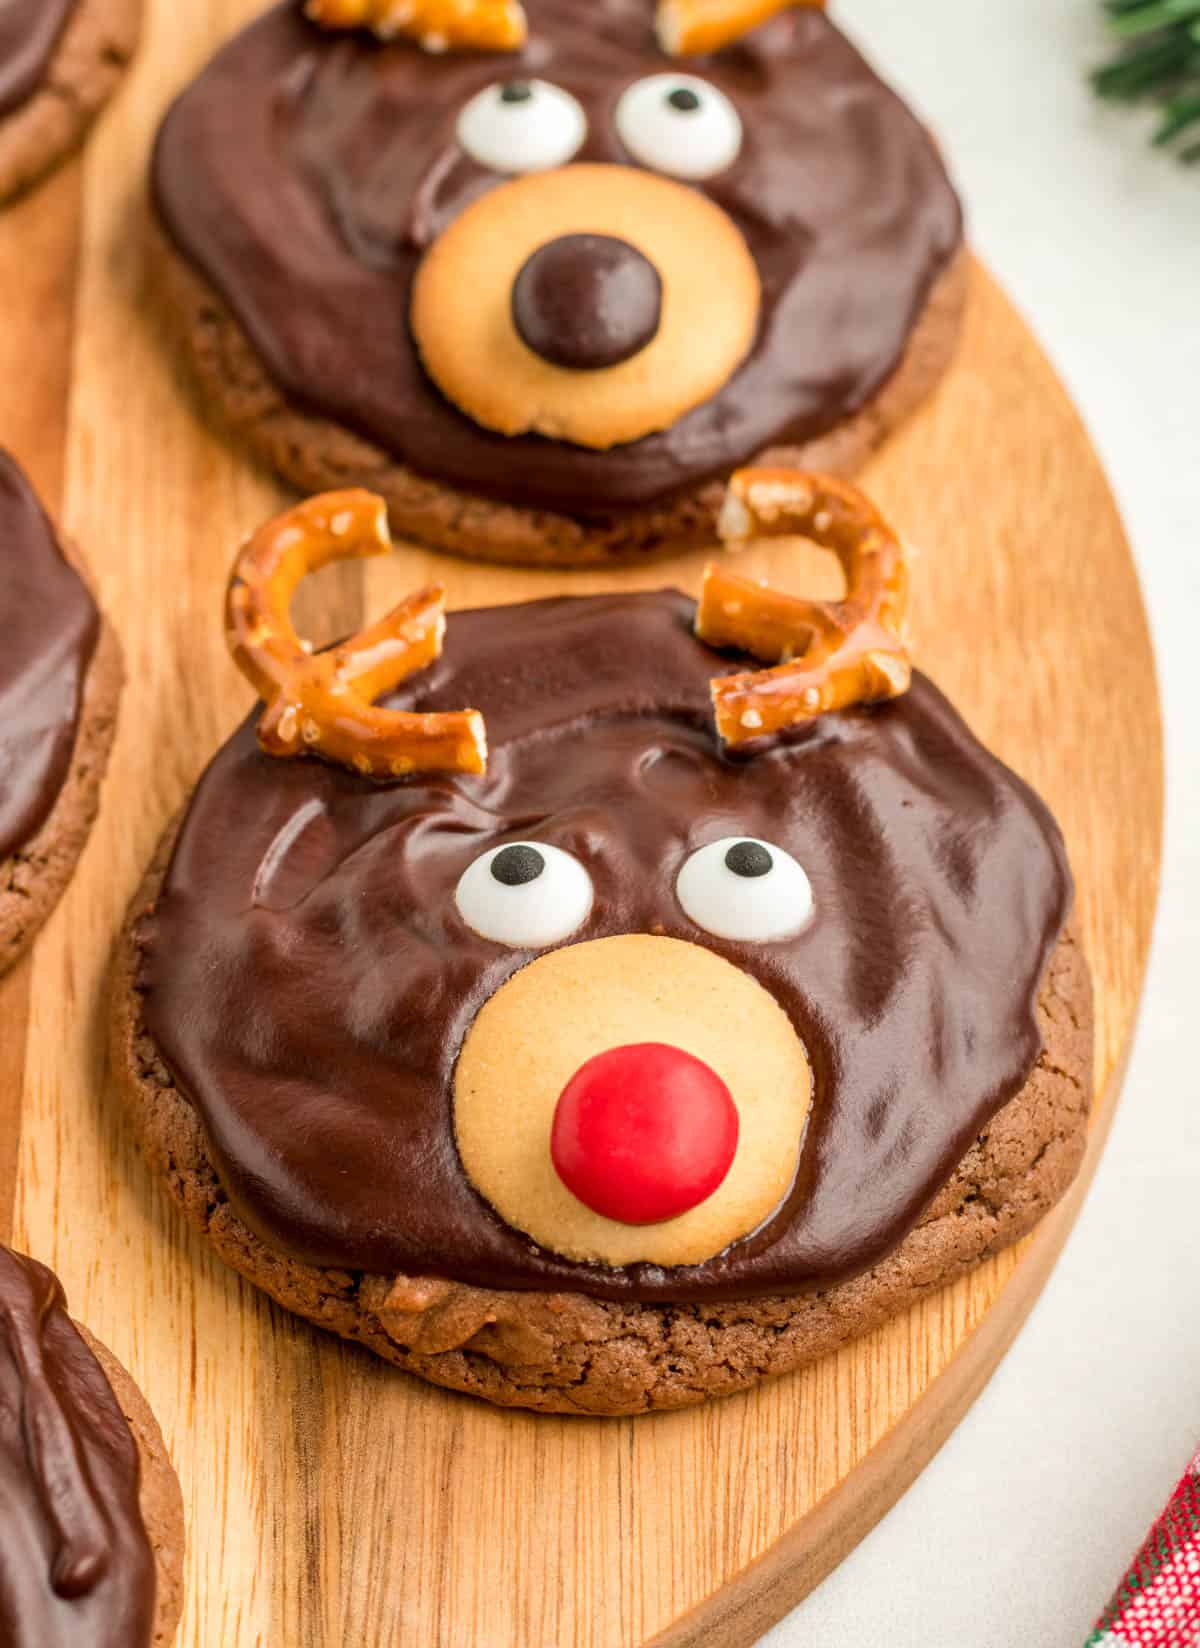 Close up of one finished Reindeer Cookies on wooden board.